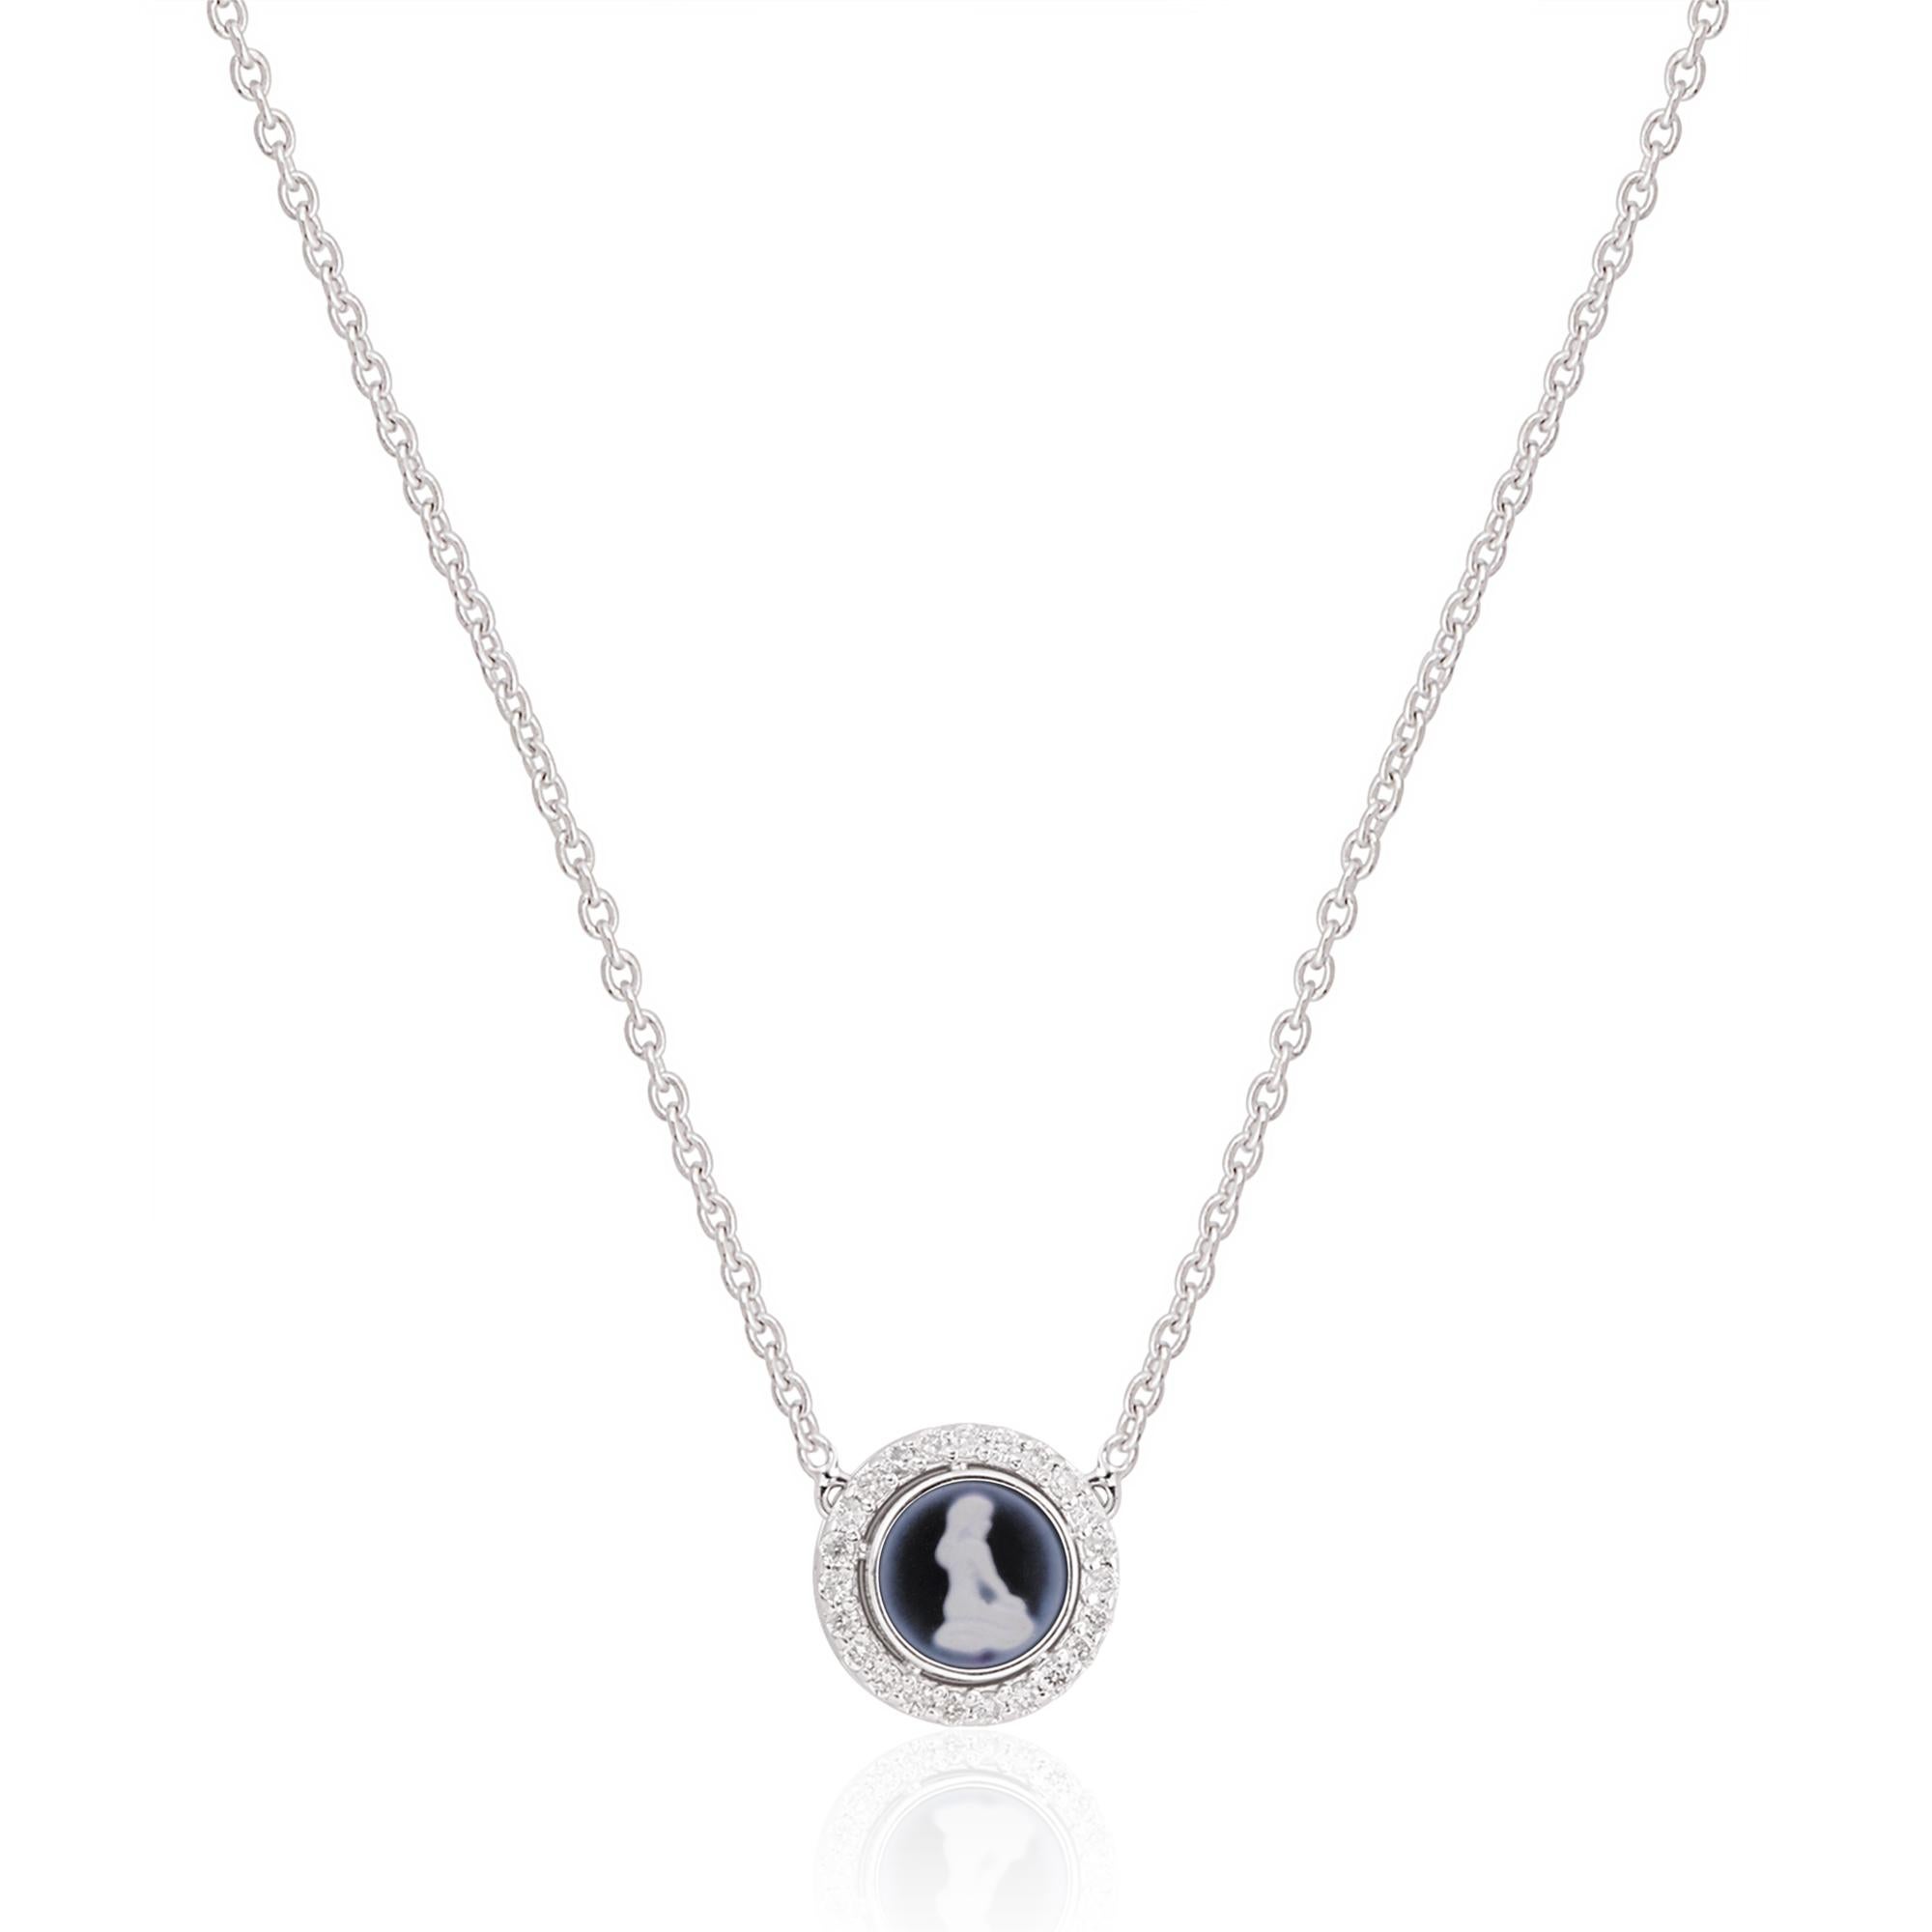 Celebrate your astrological identity with this stunning Virgo zodiac sign charm pendant necklace. Meticulously crafted in 14-karat white gold, this fine jewelry piece showcases intricate detailing and sparkling natural diamonds, making it a true